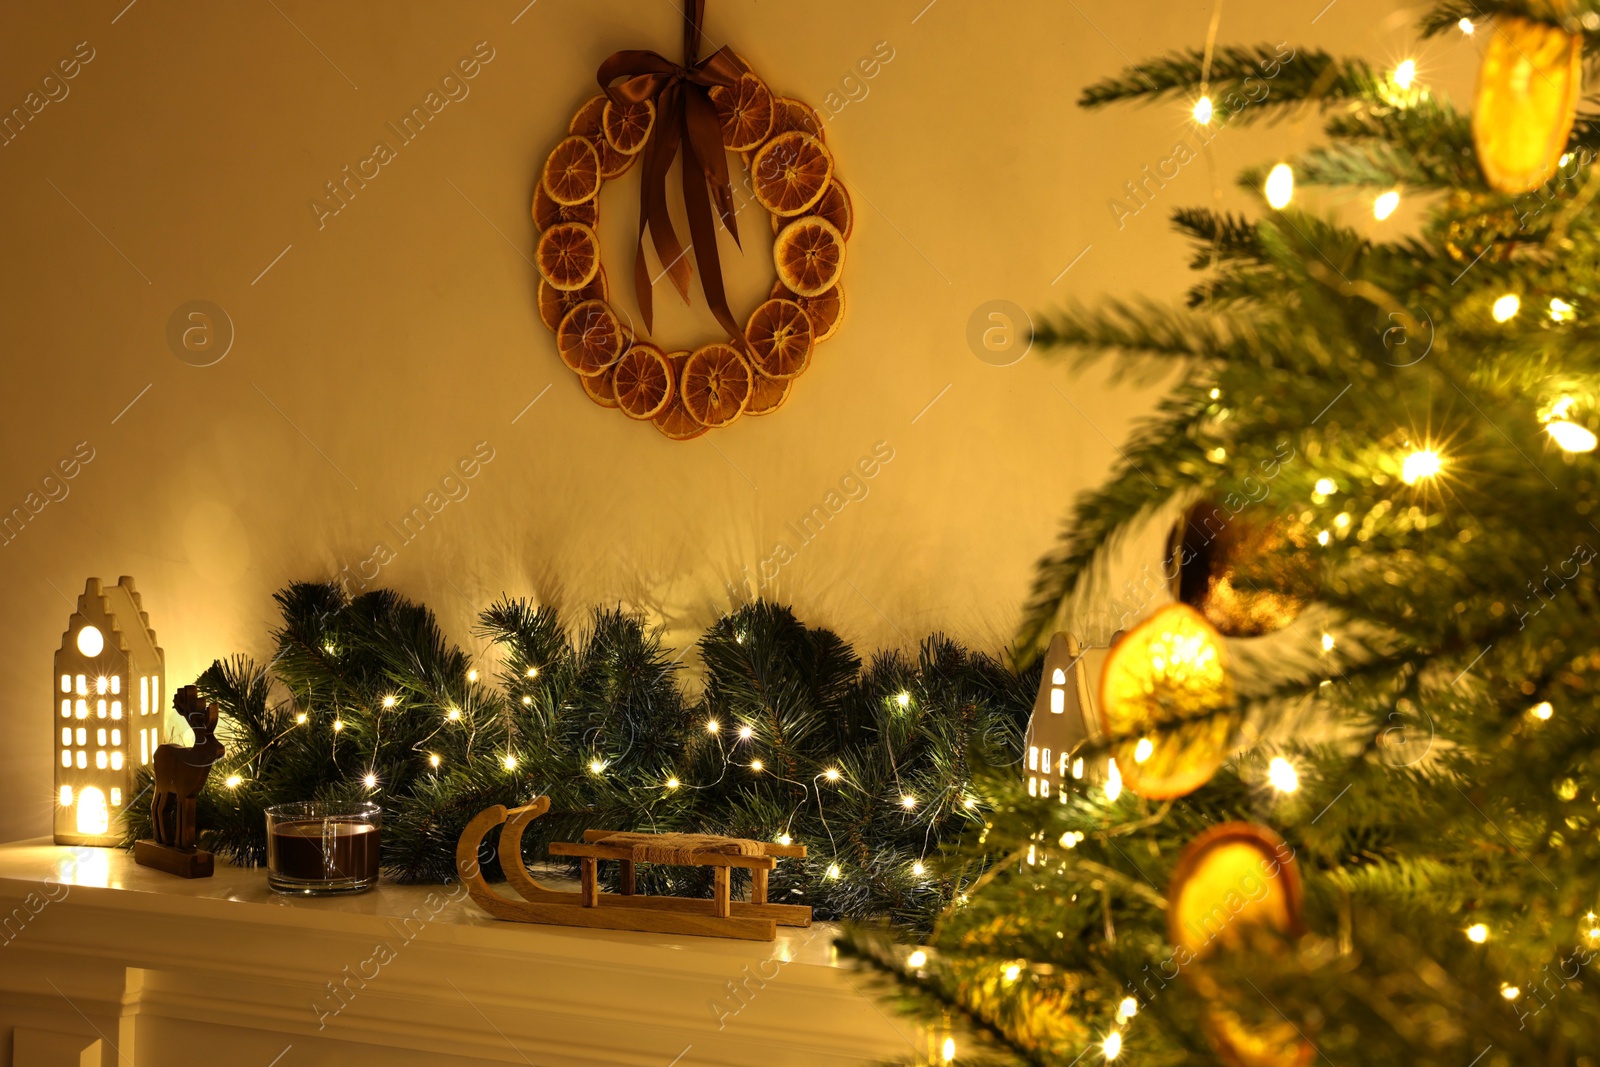 Photo of Fireplace with Christmas accessories and decorative wreath near fir tree indoors